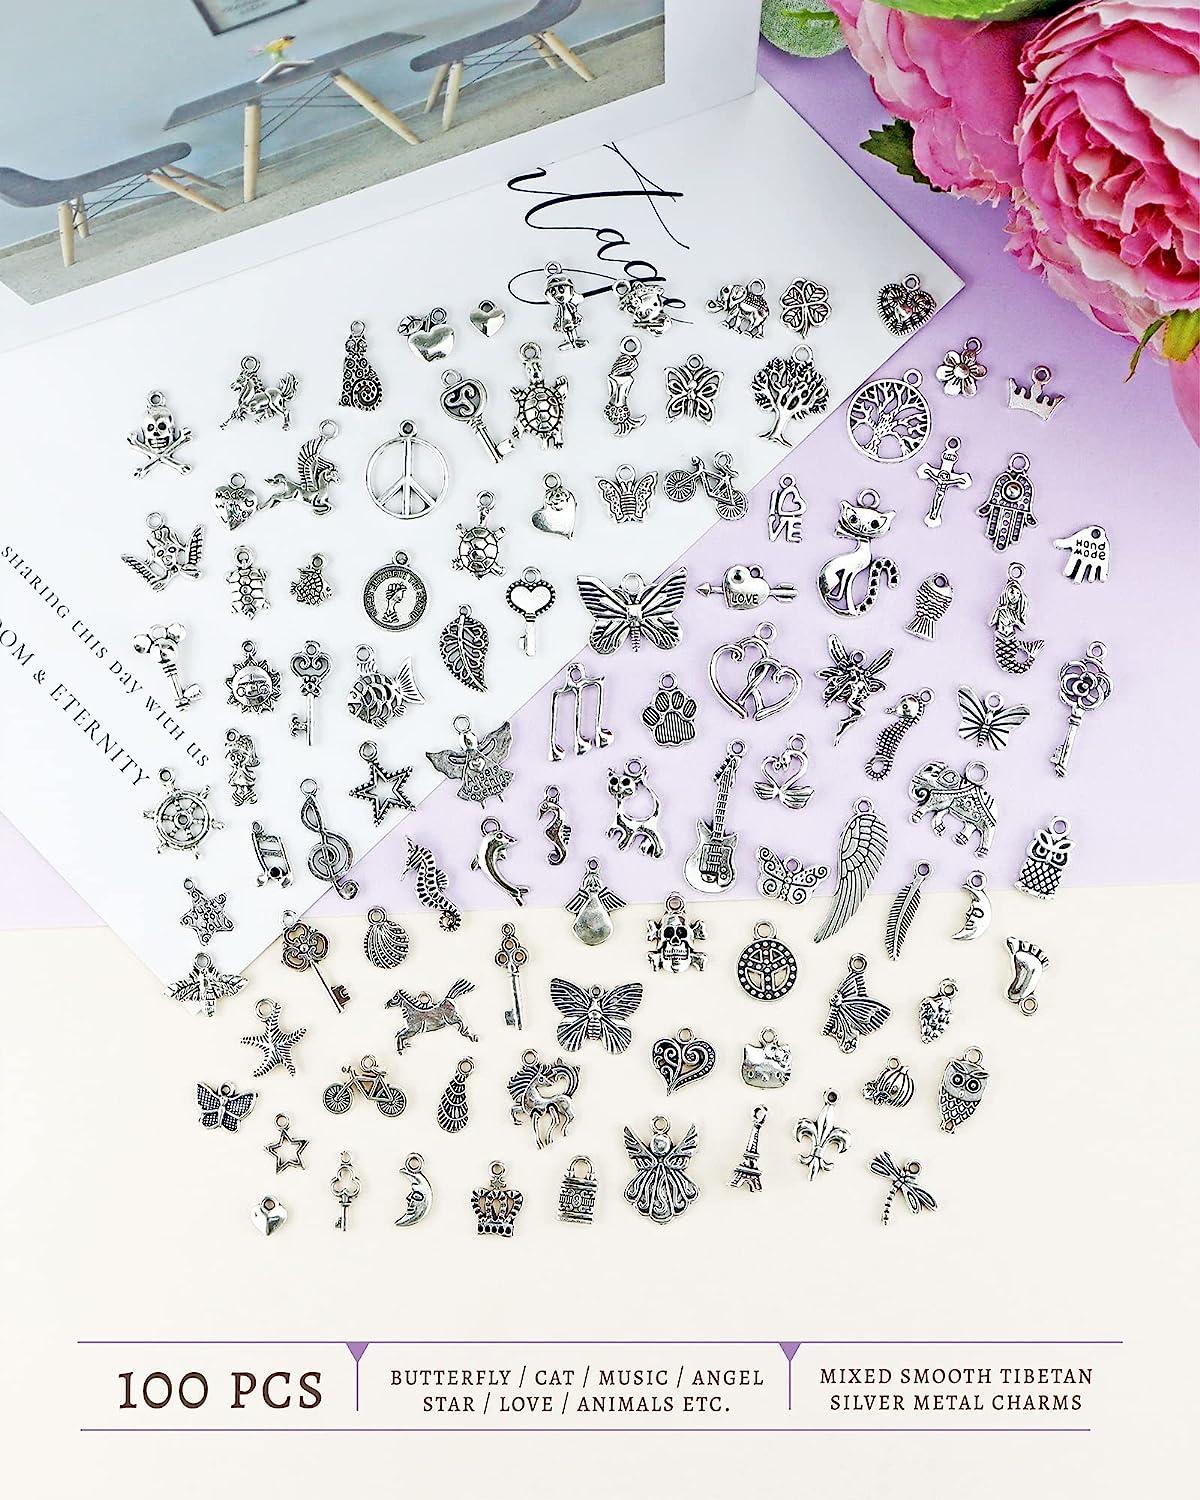  300 Pieces Smooth Tibetan Silver Metal Charms Pendants for DIY Craft  Jewelry Making Bracelet Necklace Pendant Earring Accessories